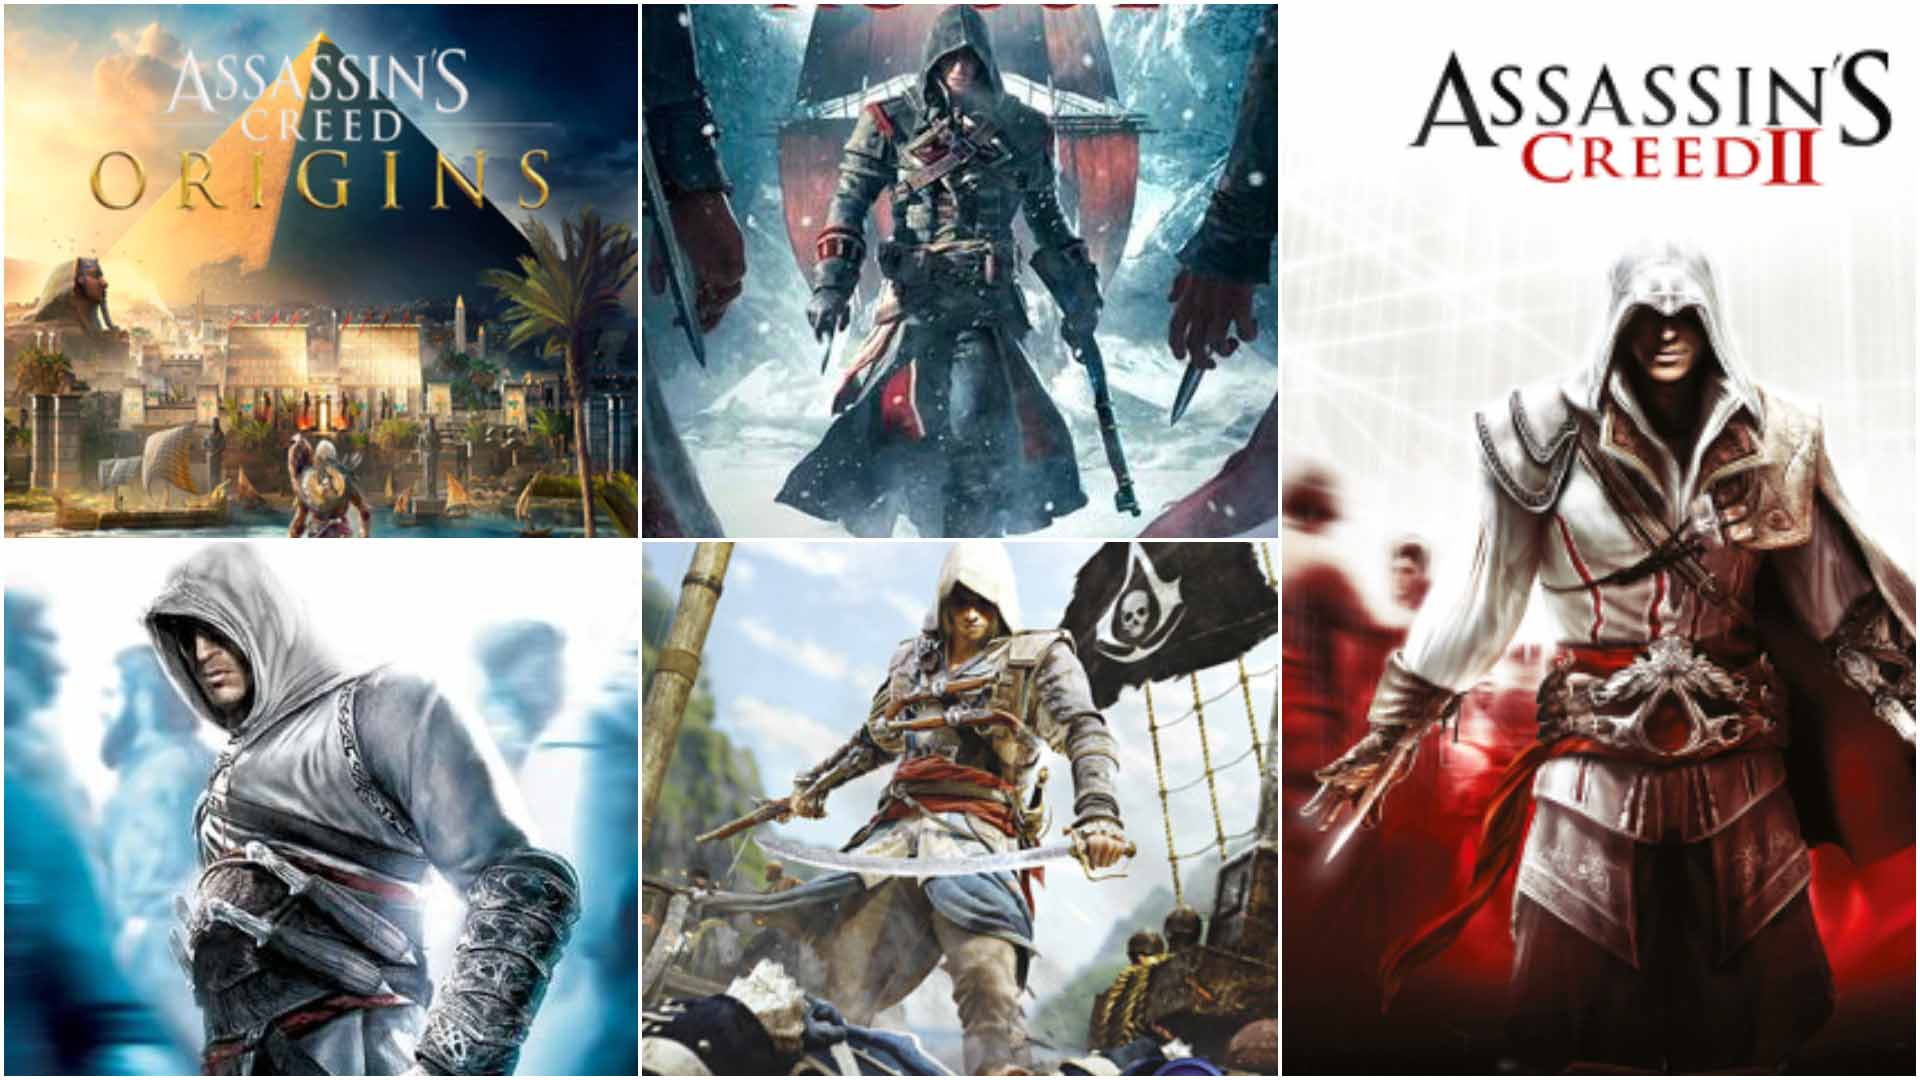 the newest assassin's creed game ps4